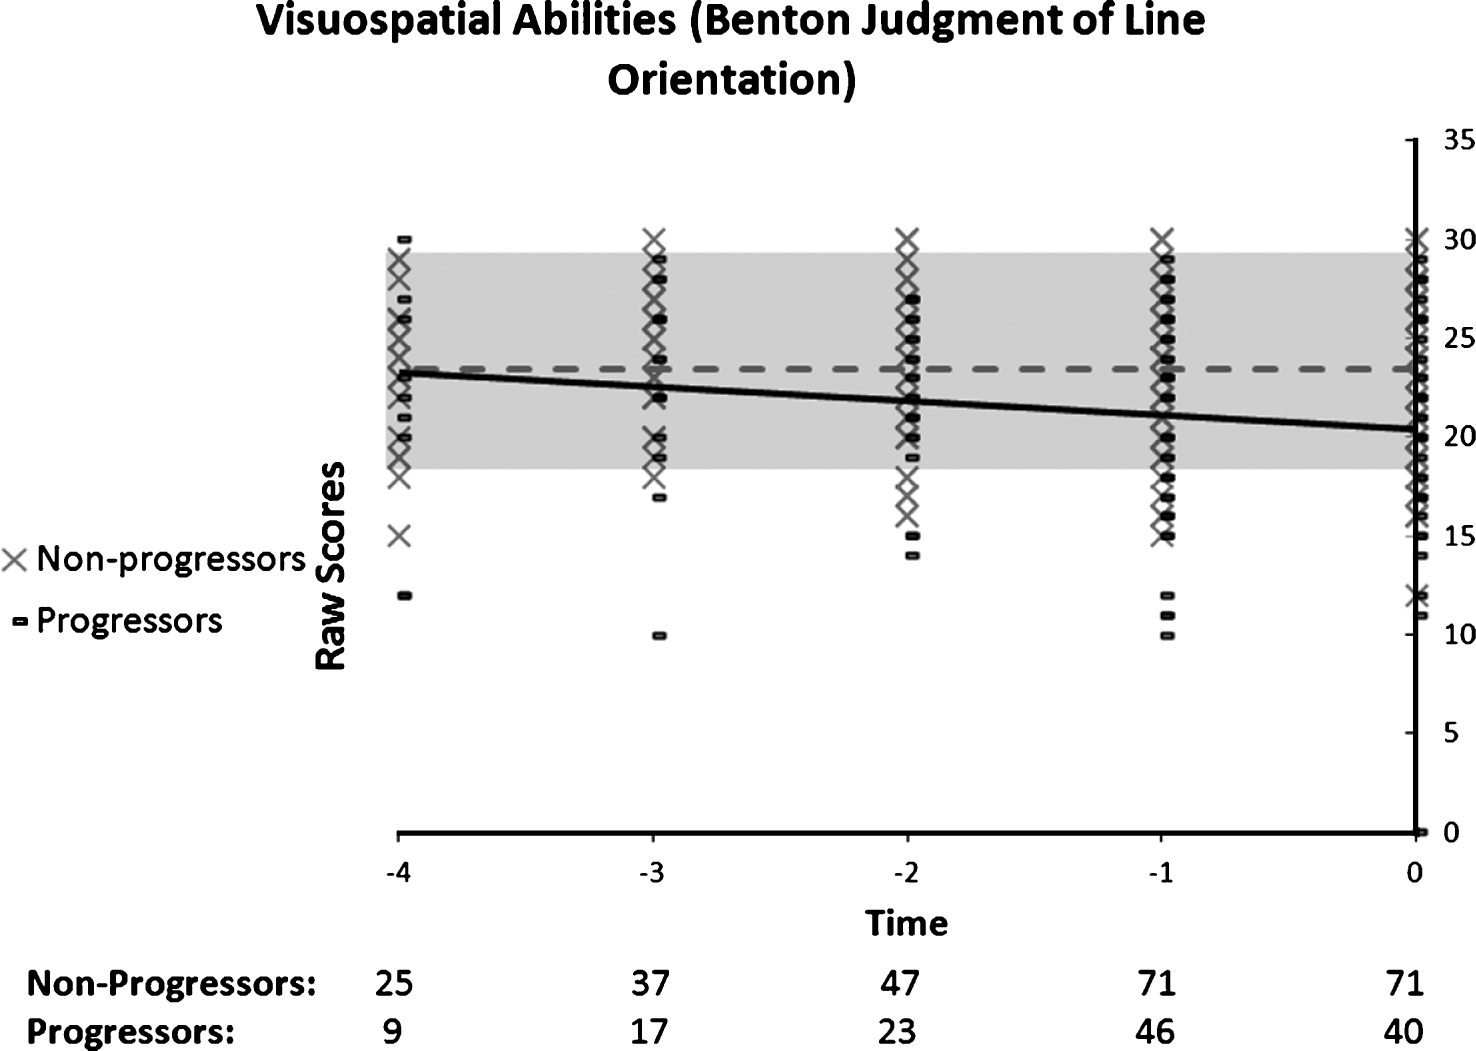 Performance on the Benton Judgment of Line Orientation as a function of time to diagnosis (for progressors) or on the last 5 cognitive assessments (for non-progressors). A linear function best describes the distribution for the progressors: black line. No significant model is found in the non-progressors: dotted grey line.